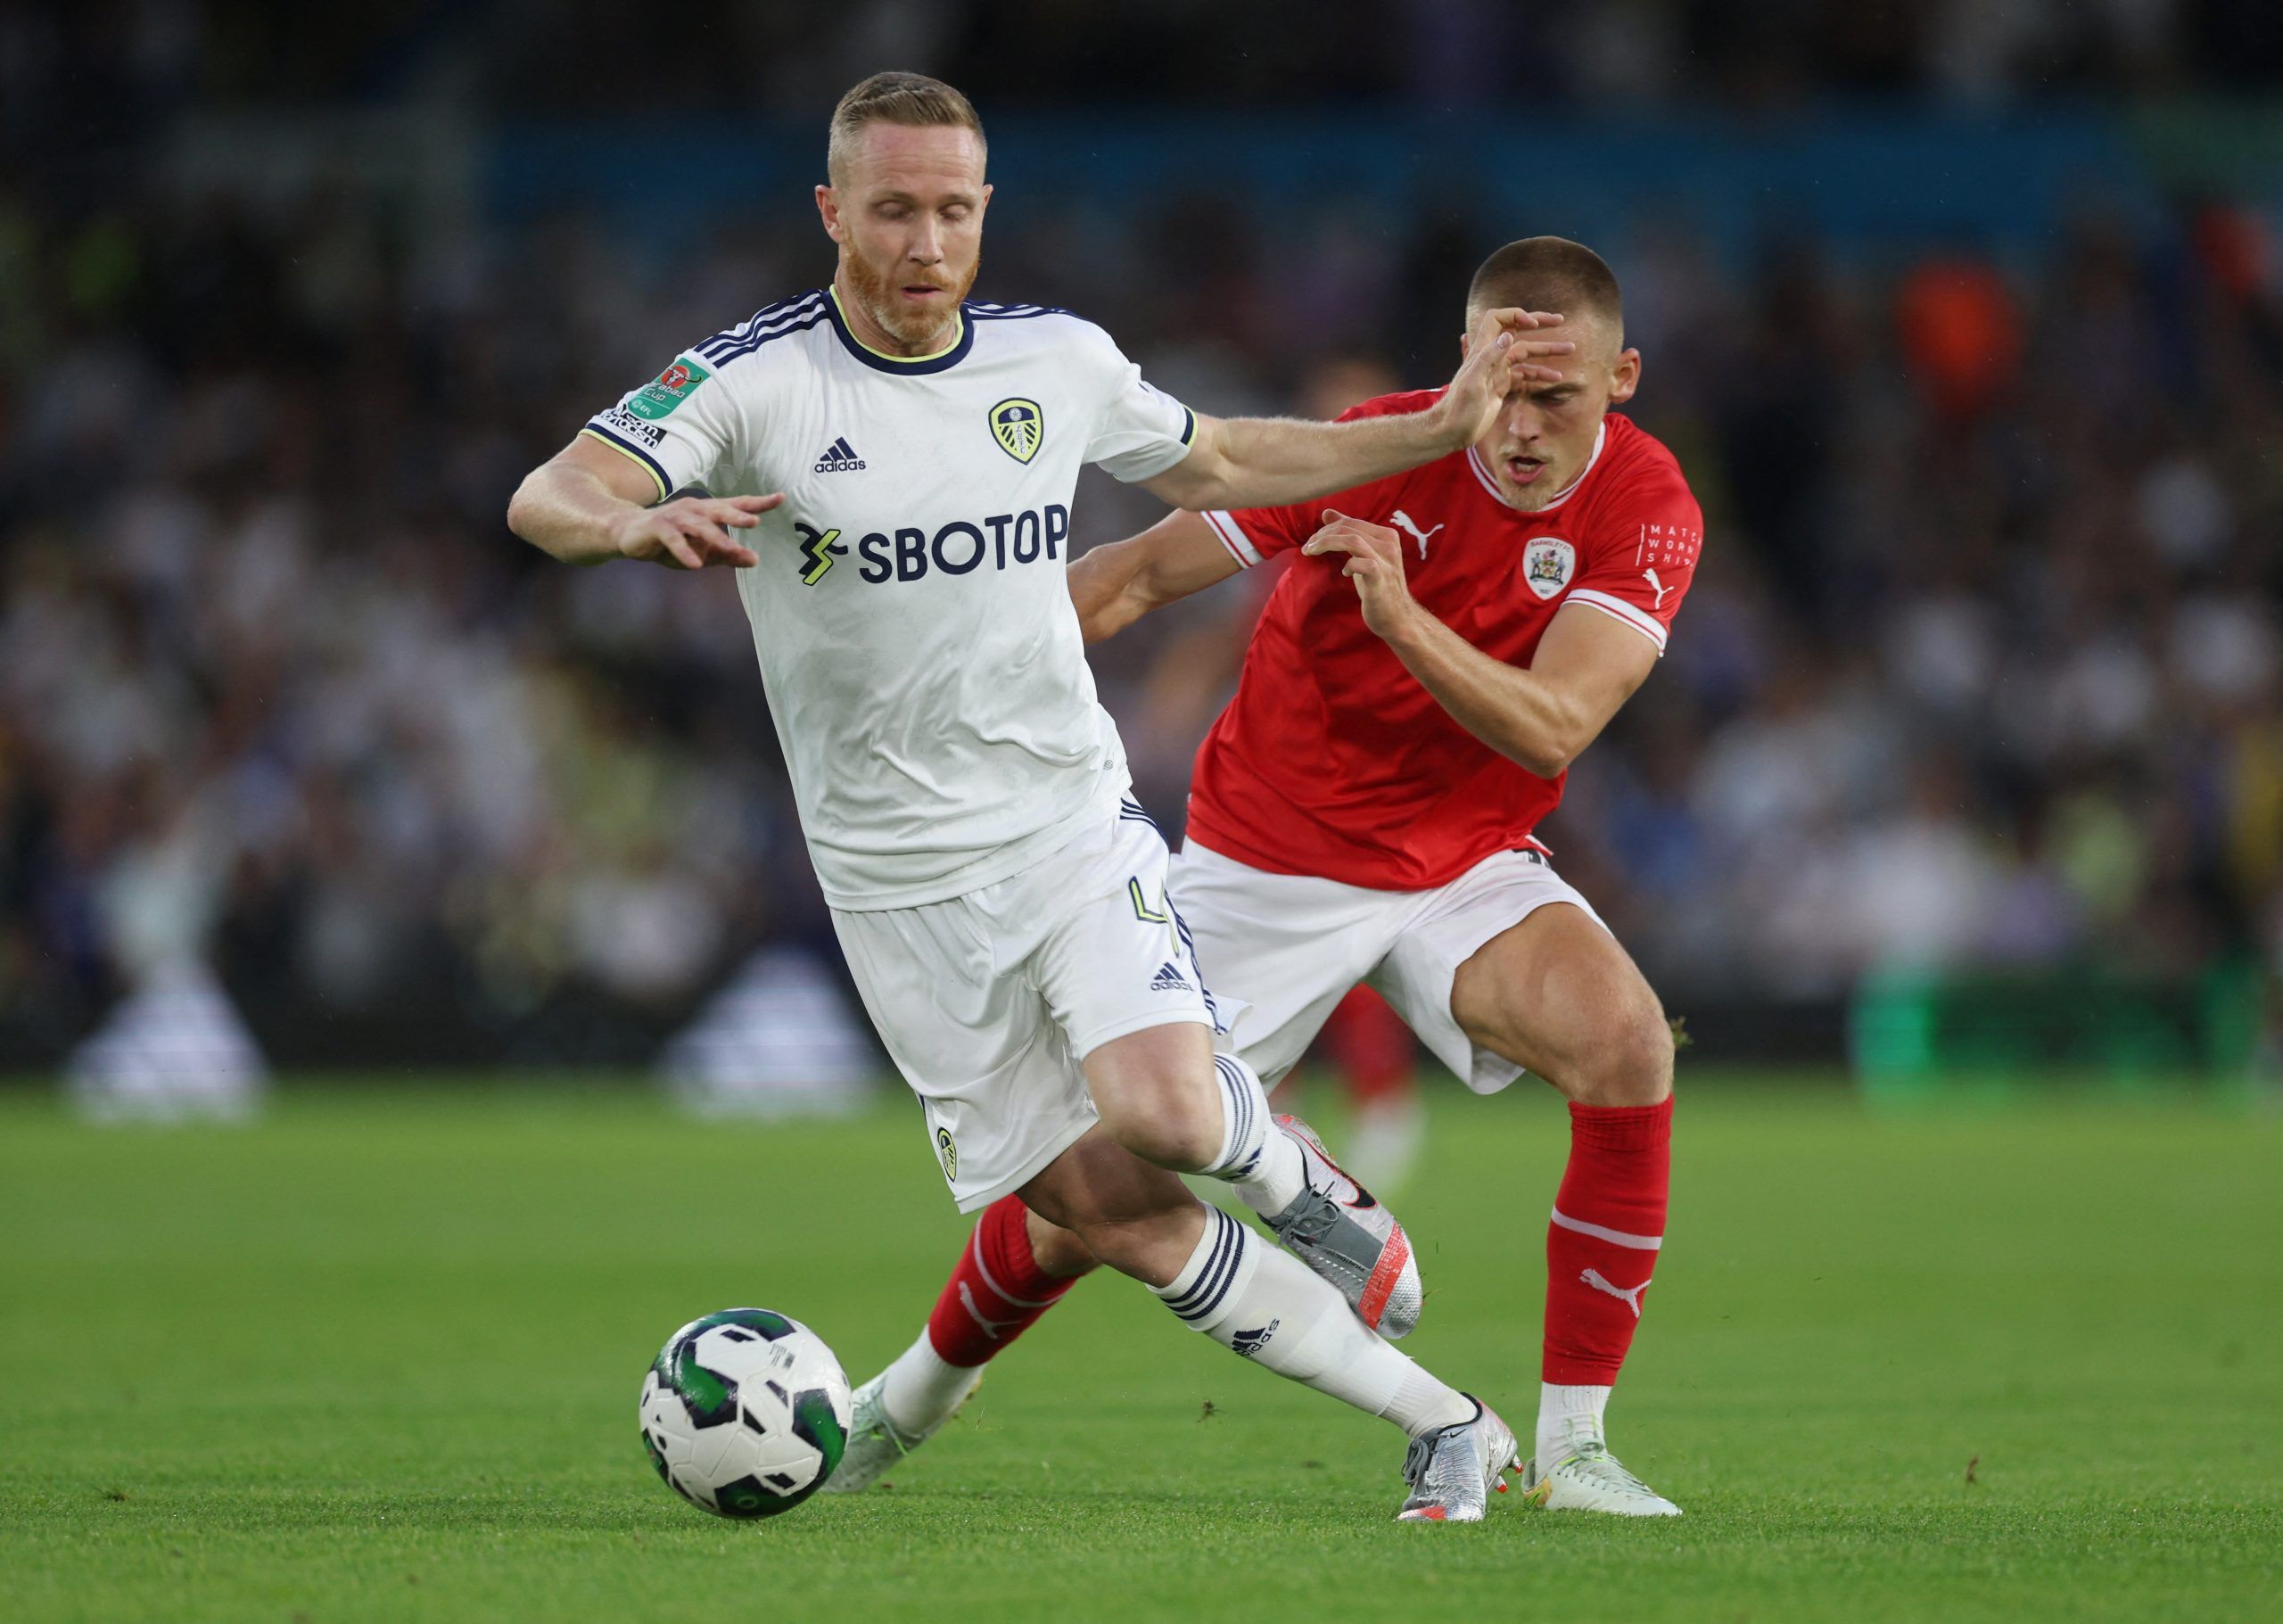 Leeds: Adam Forshaw in Championship sides transfer race -Leeds United News